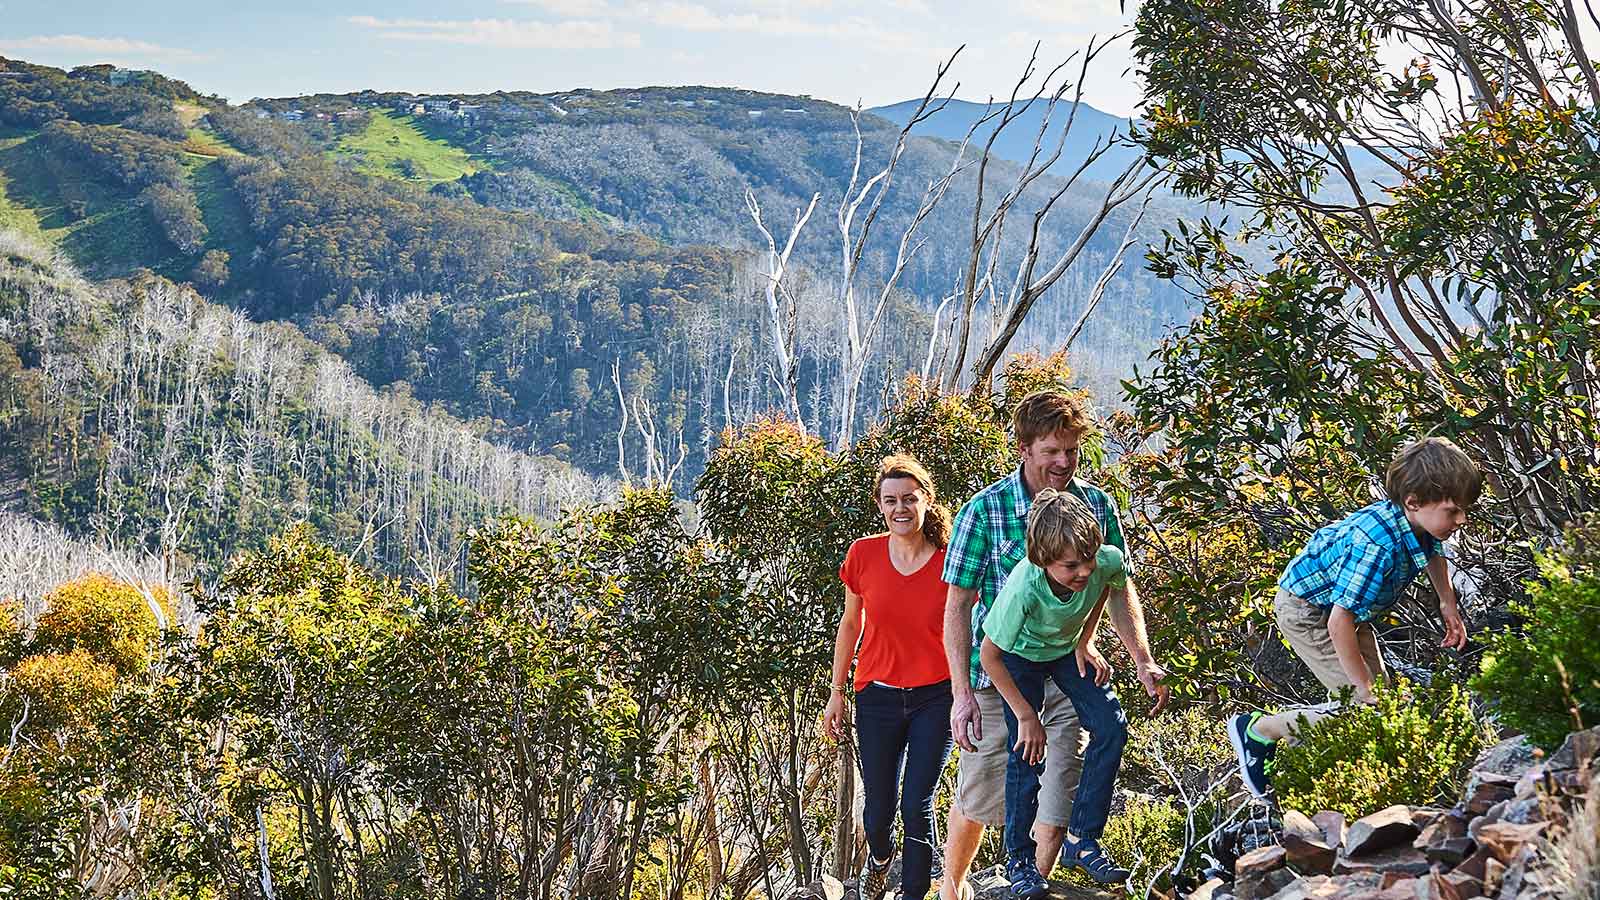 Little Mt Buller - Victoria's High Country